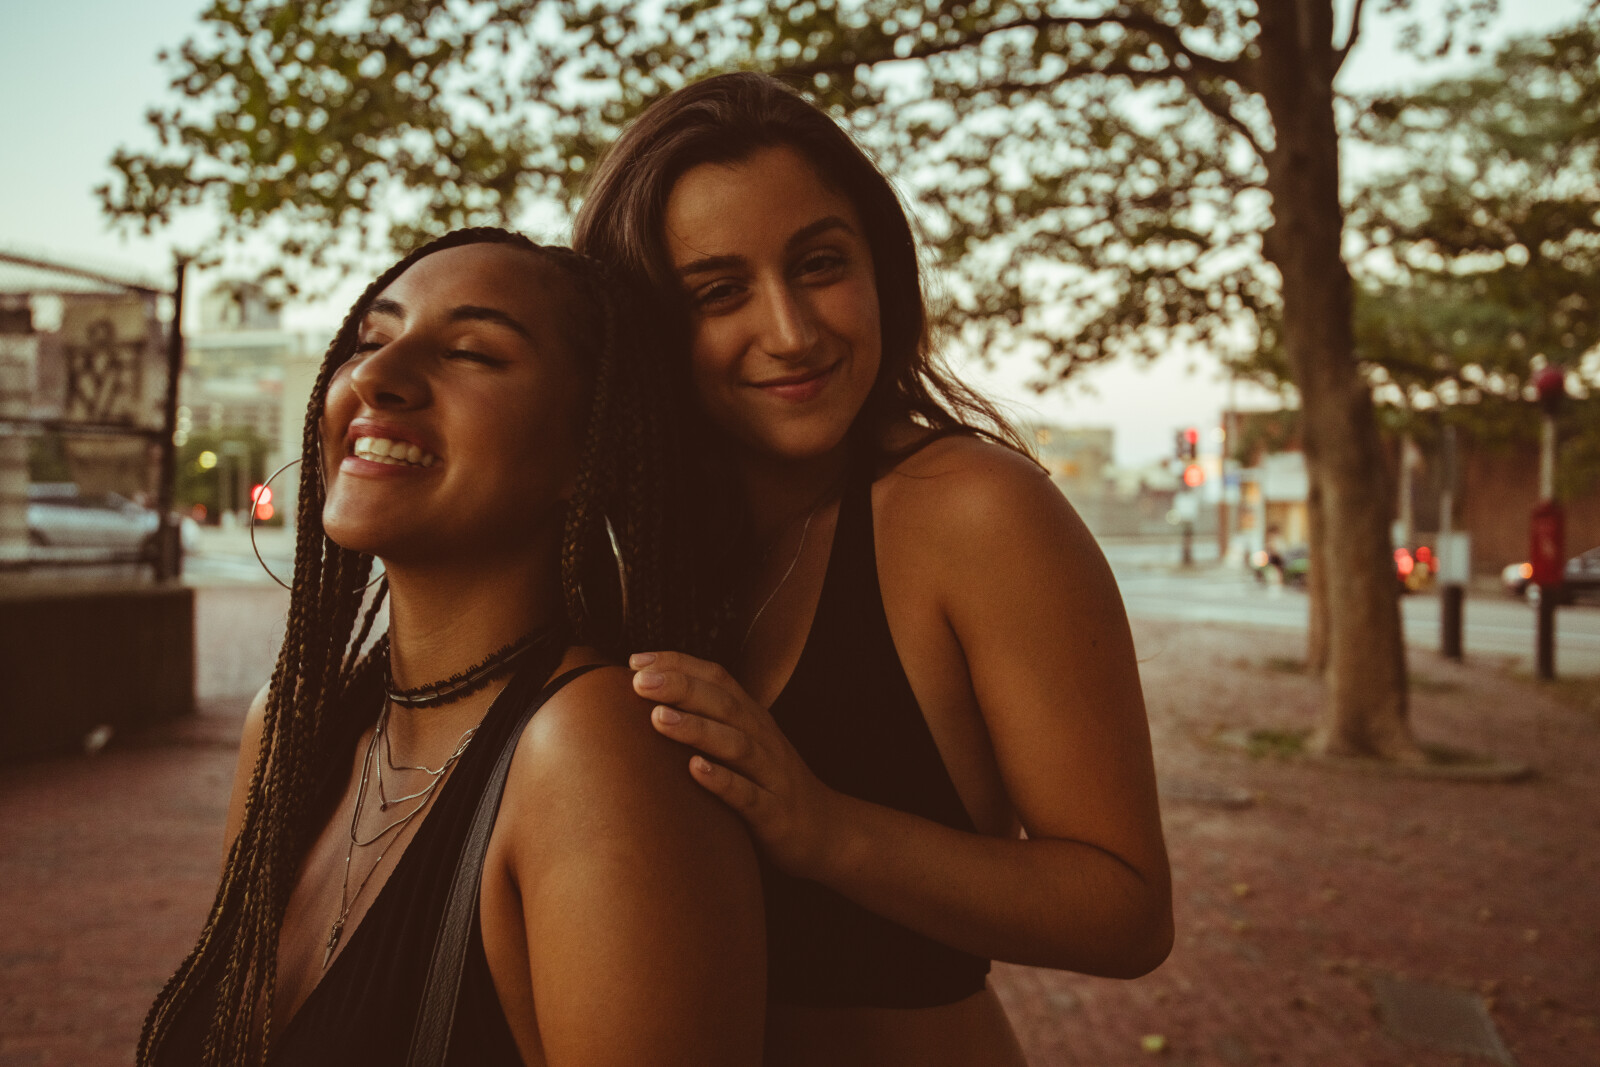 Two women hugging front to back at a park